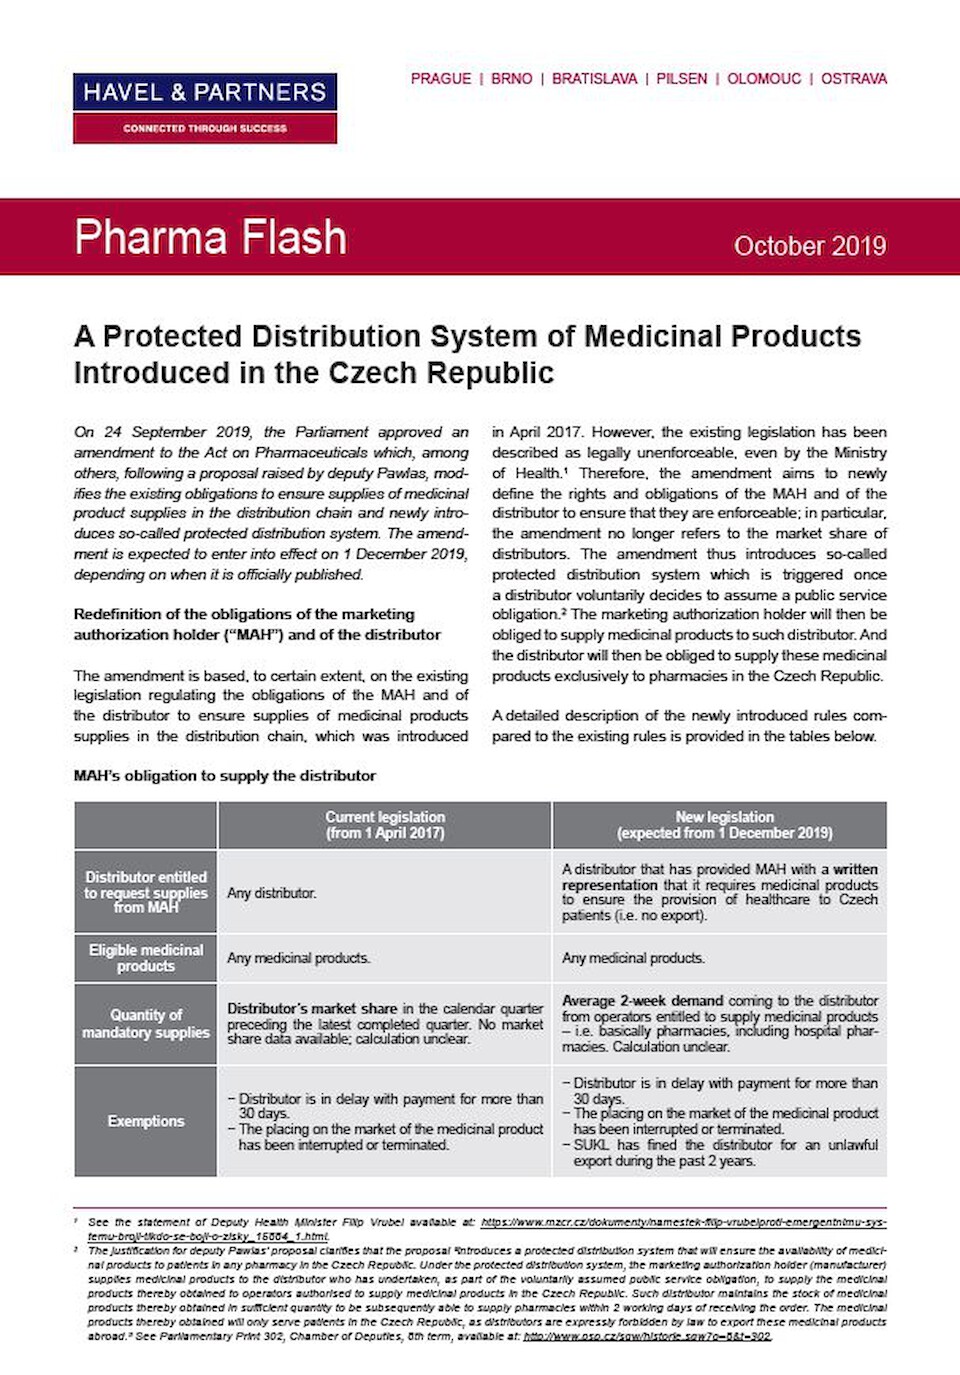 A Protected Distribution System of Medicinal Products Introduced in the Czech Republic